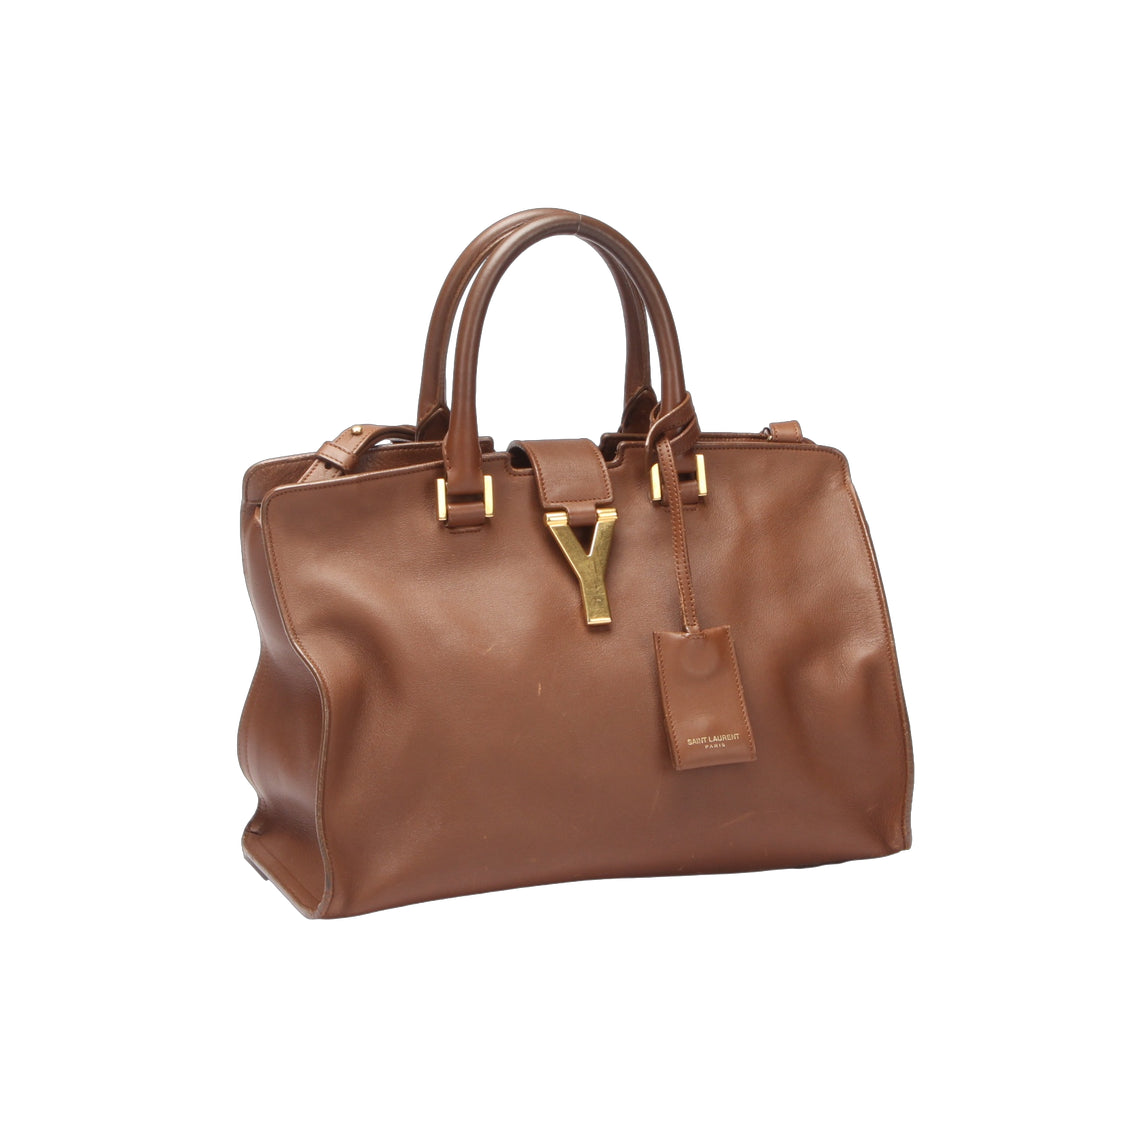 Cabas Chyc Leather Satchel